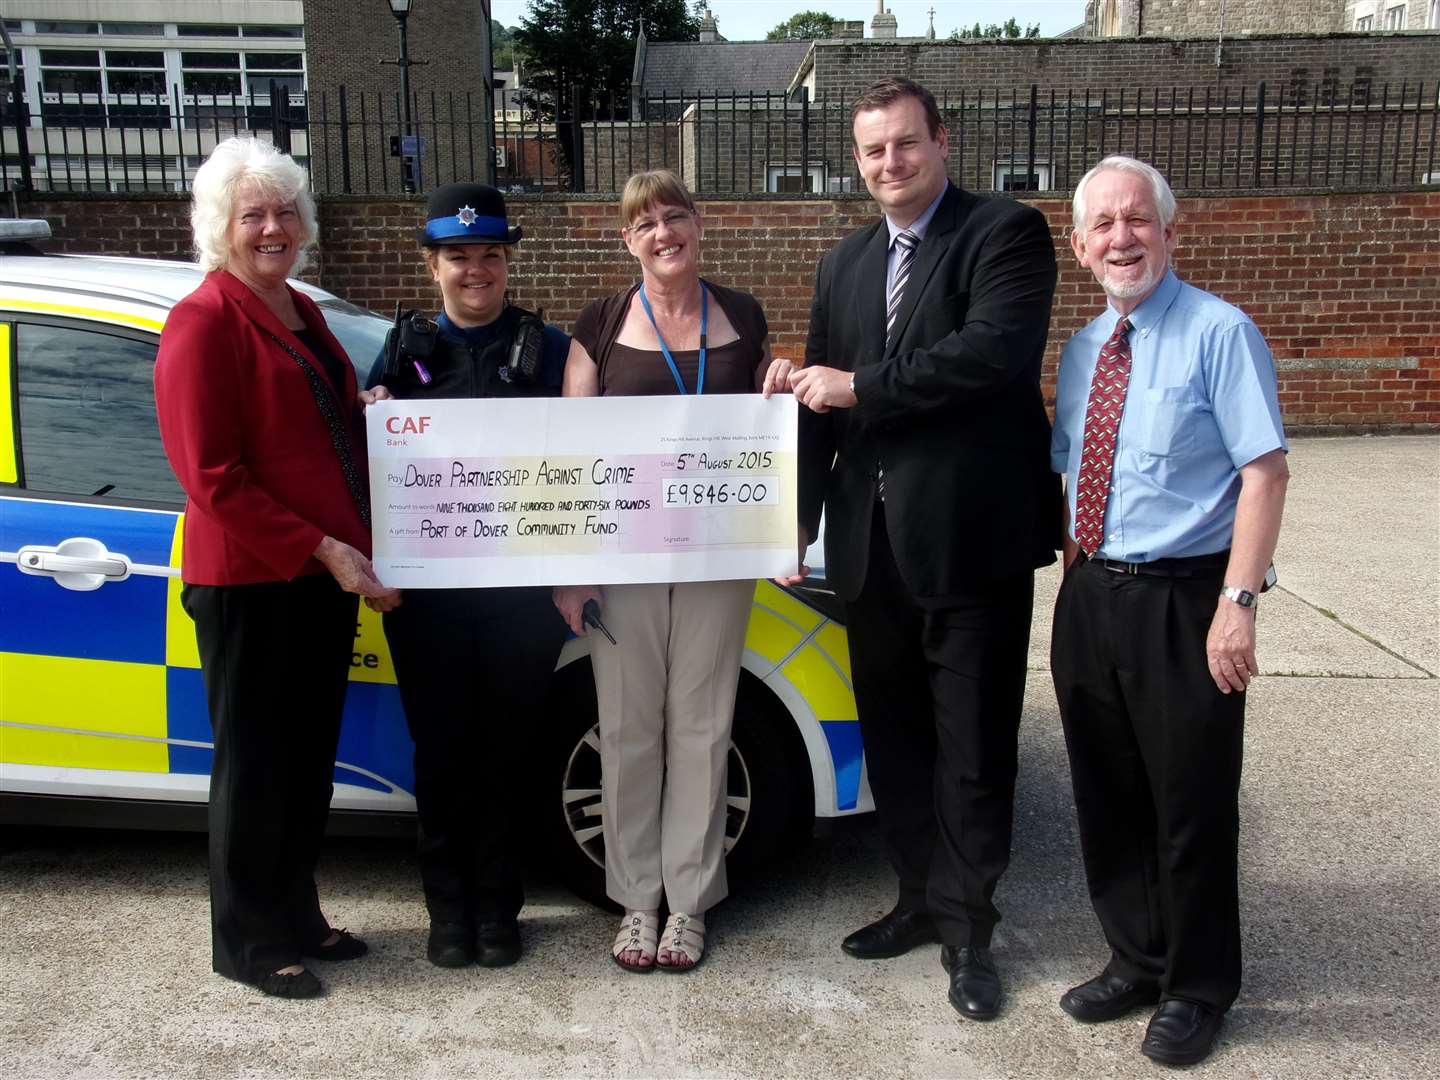 Dover Partnership Against Crime has received funding from the Port of Dover Community Fund